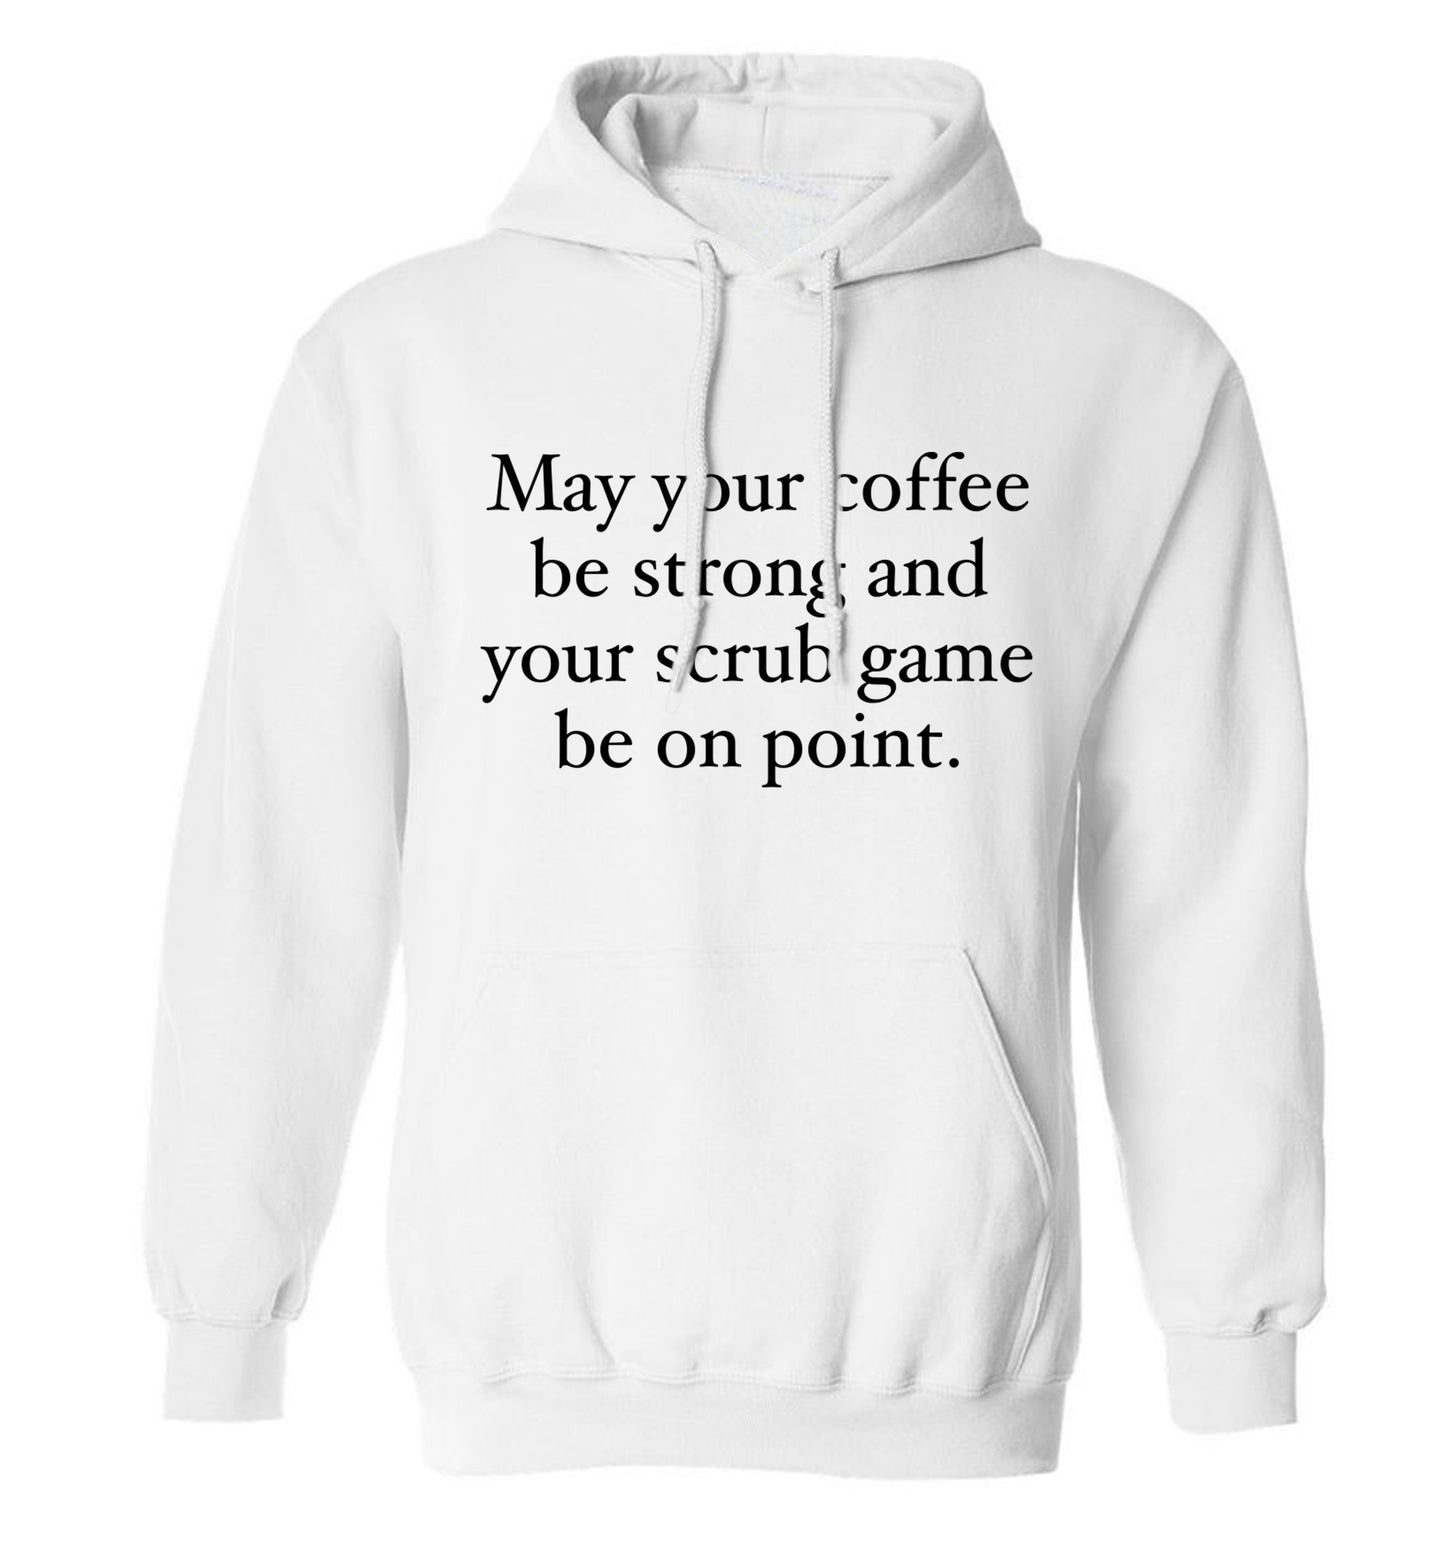 May your caffeine be strong and your scrub game be on point adults unisex white hoodie 2XL